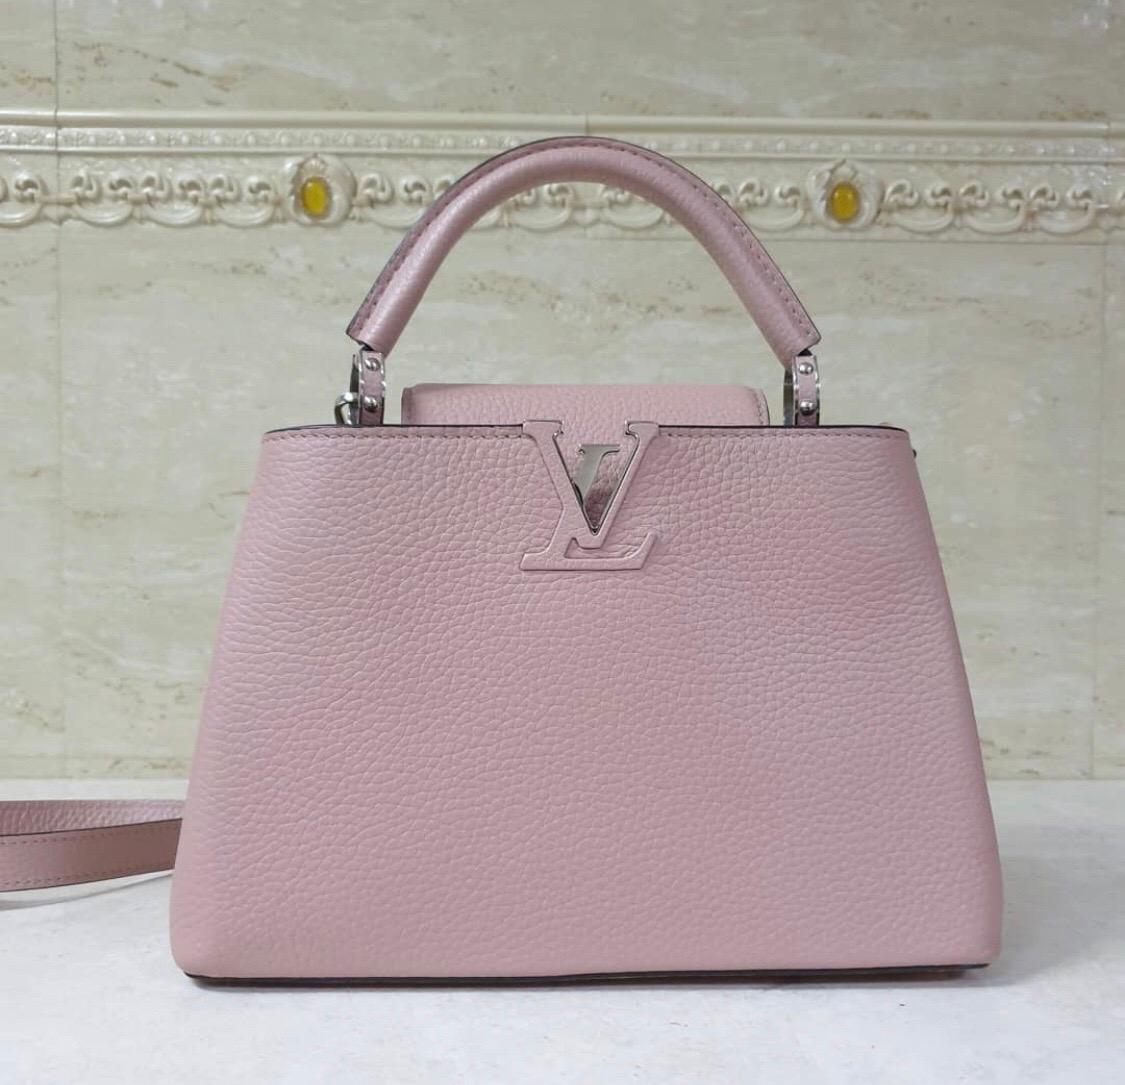 Named after the 'rue de Capucines' in Paris, where Louis Vuitton opened his first store in 1854, the Capucines BB bag is timeless and elegant. Paying homage to the history of superb craftsmanship that the house of Louis Vuitton is known for, the